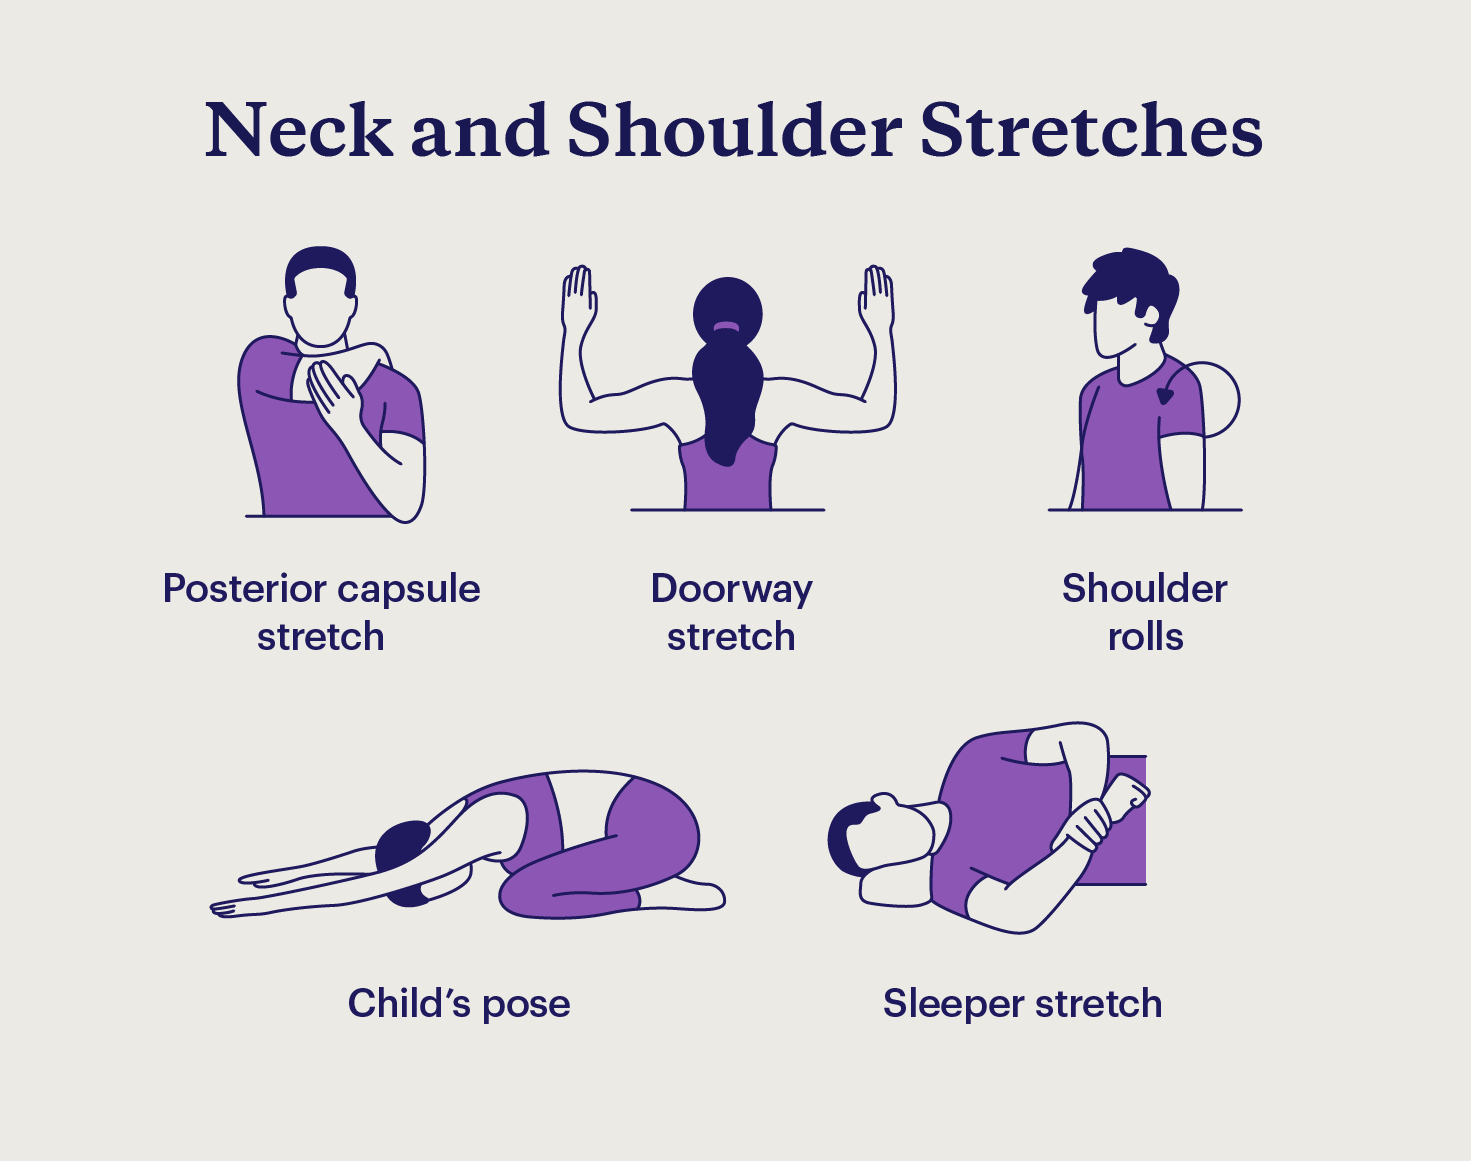 Various stretches to relieve neck and shoulder pain.